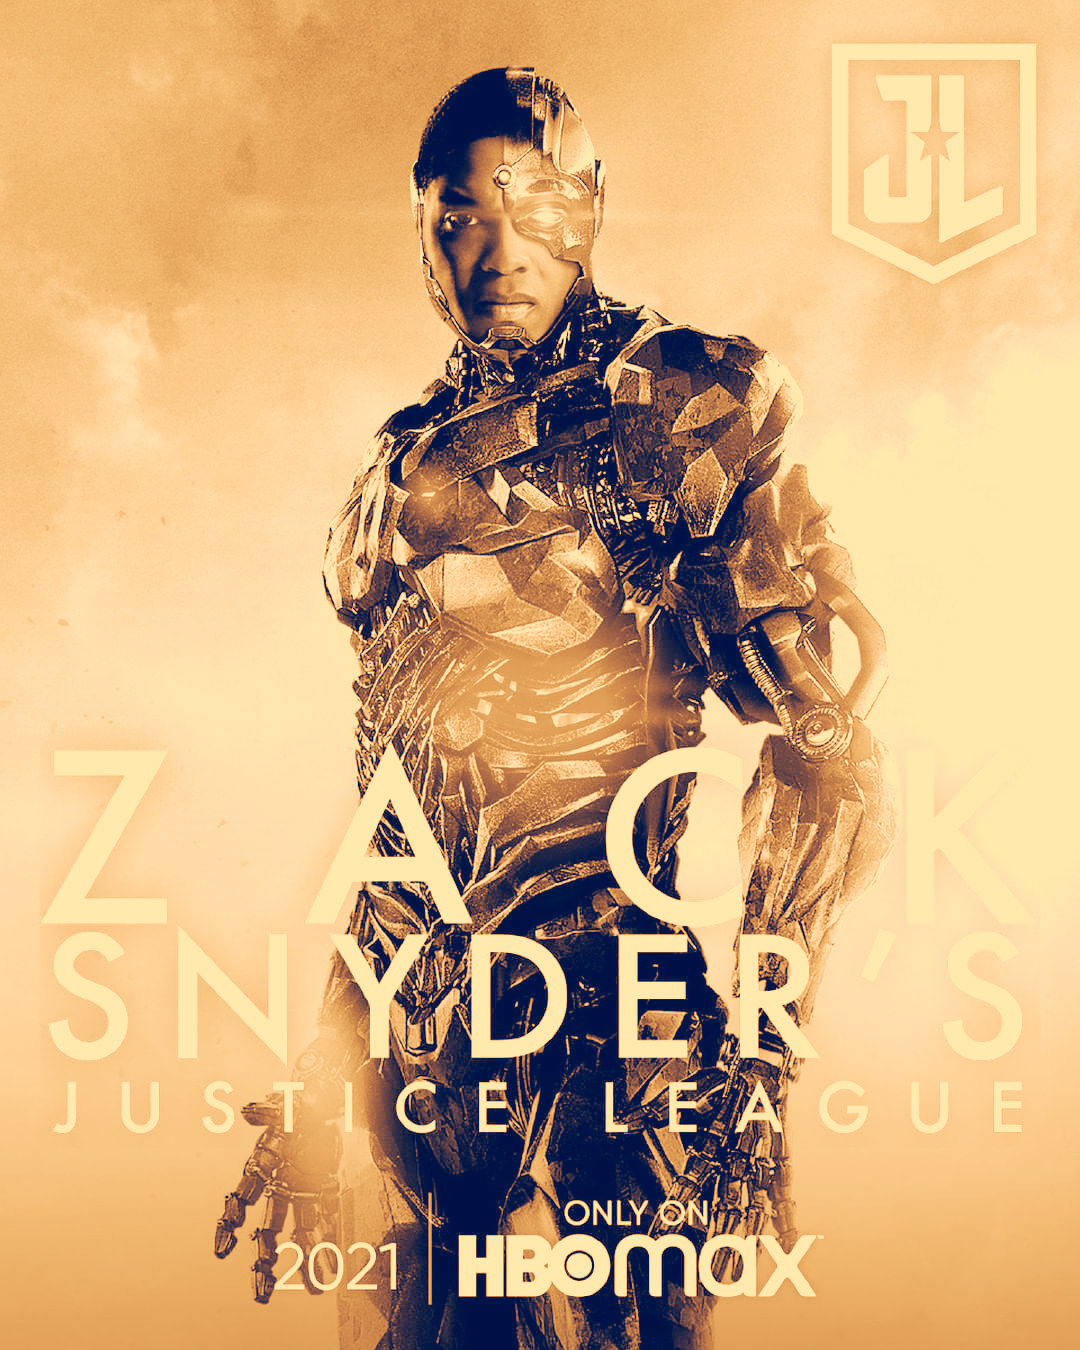 Cyborg -Zack Snyder's Justice League Poster -HBO Max 2021